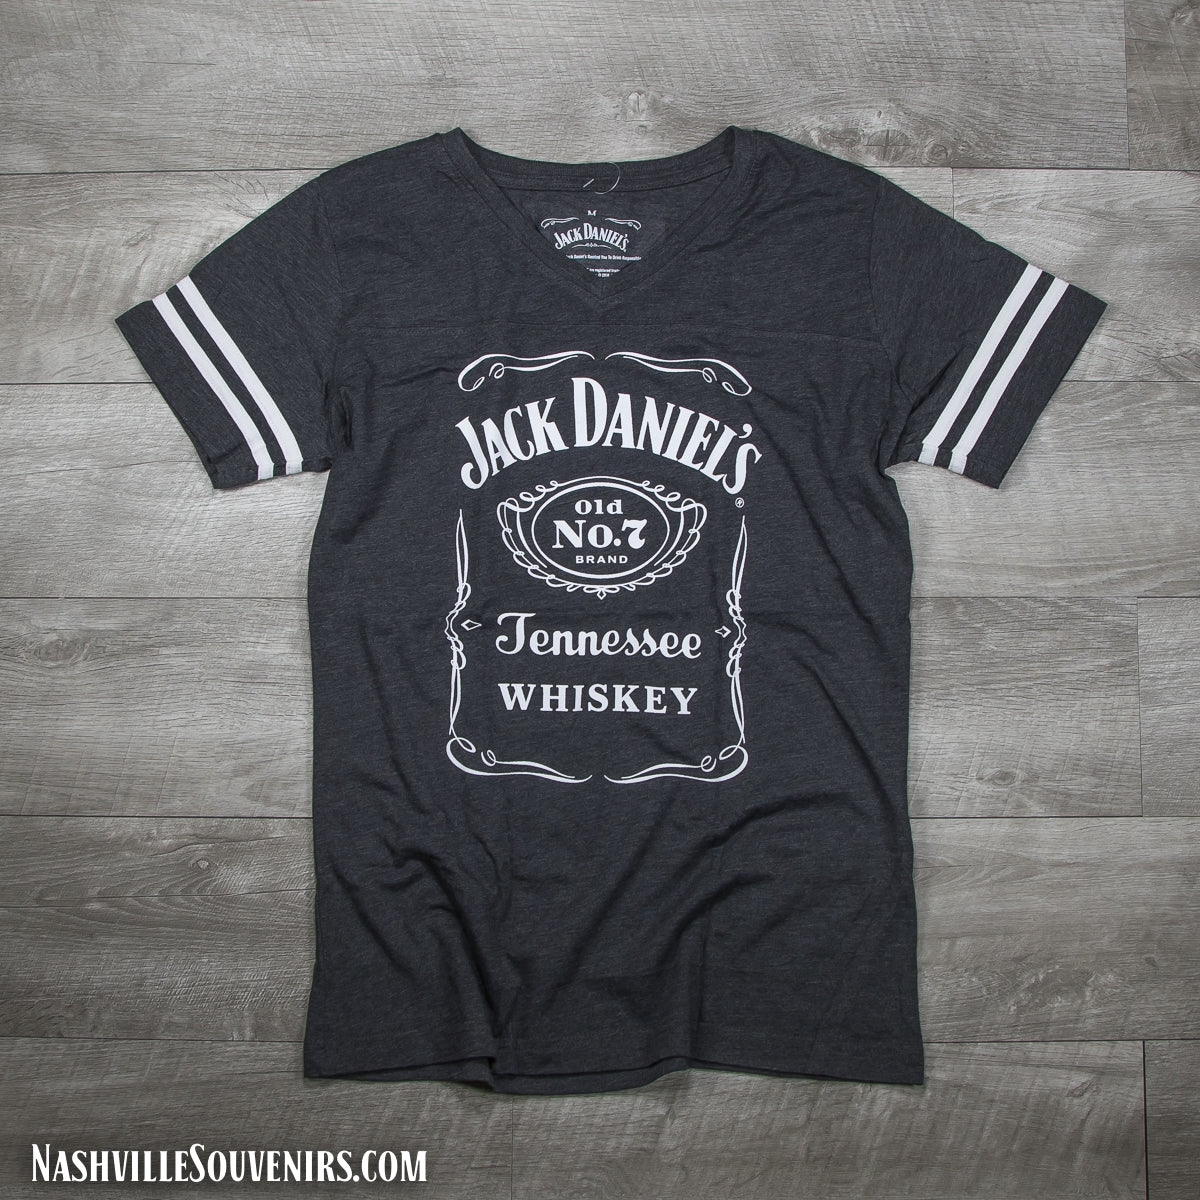 Officially licensed ladies Jack Daniels Bottle Label V-neck Jersey T-Shirt in charcoal gray with Bottle Label Logo. Get yours today with FREE SHIPPING on all US orders over $75!